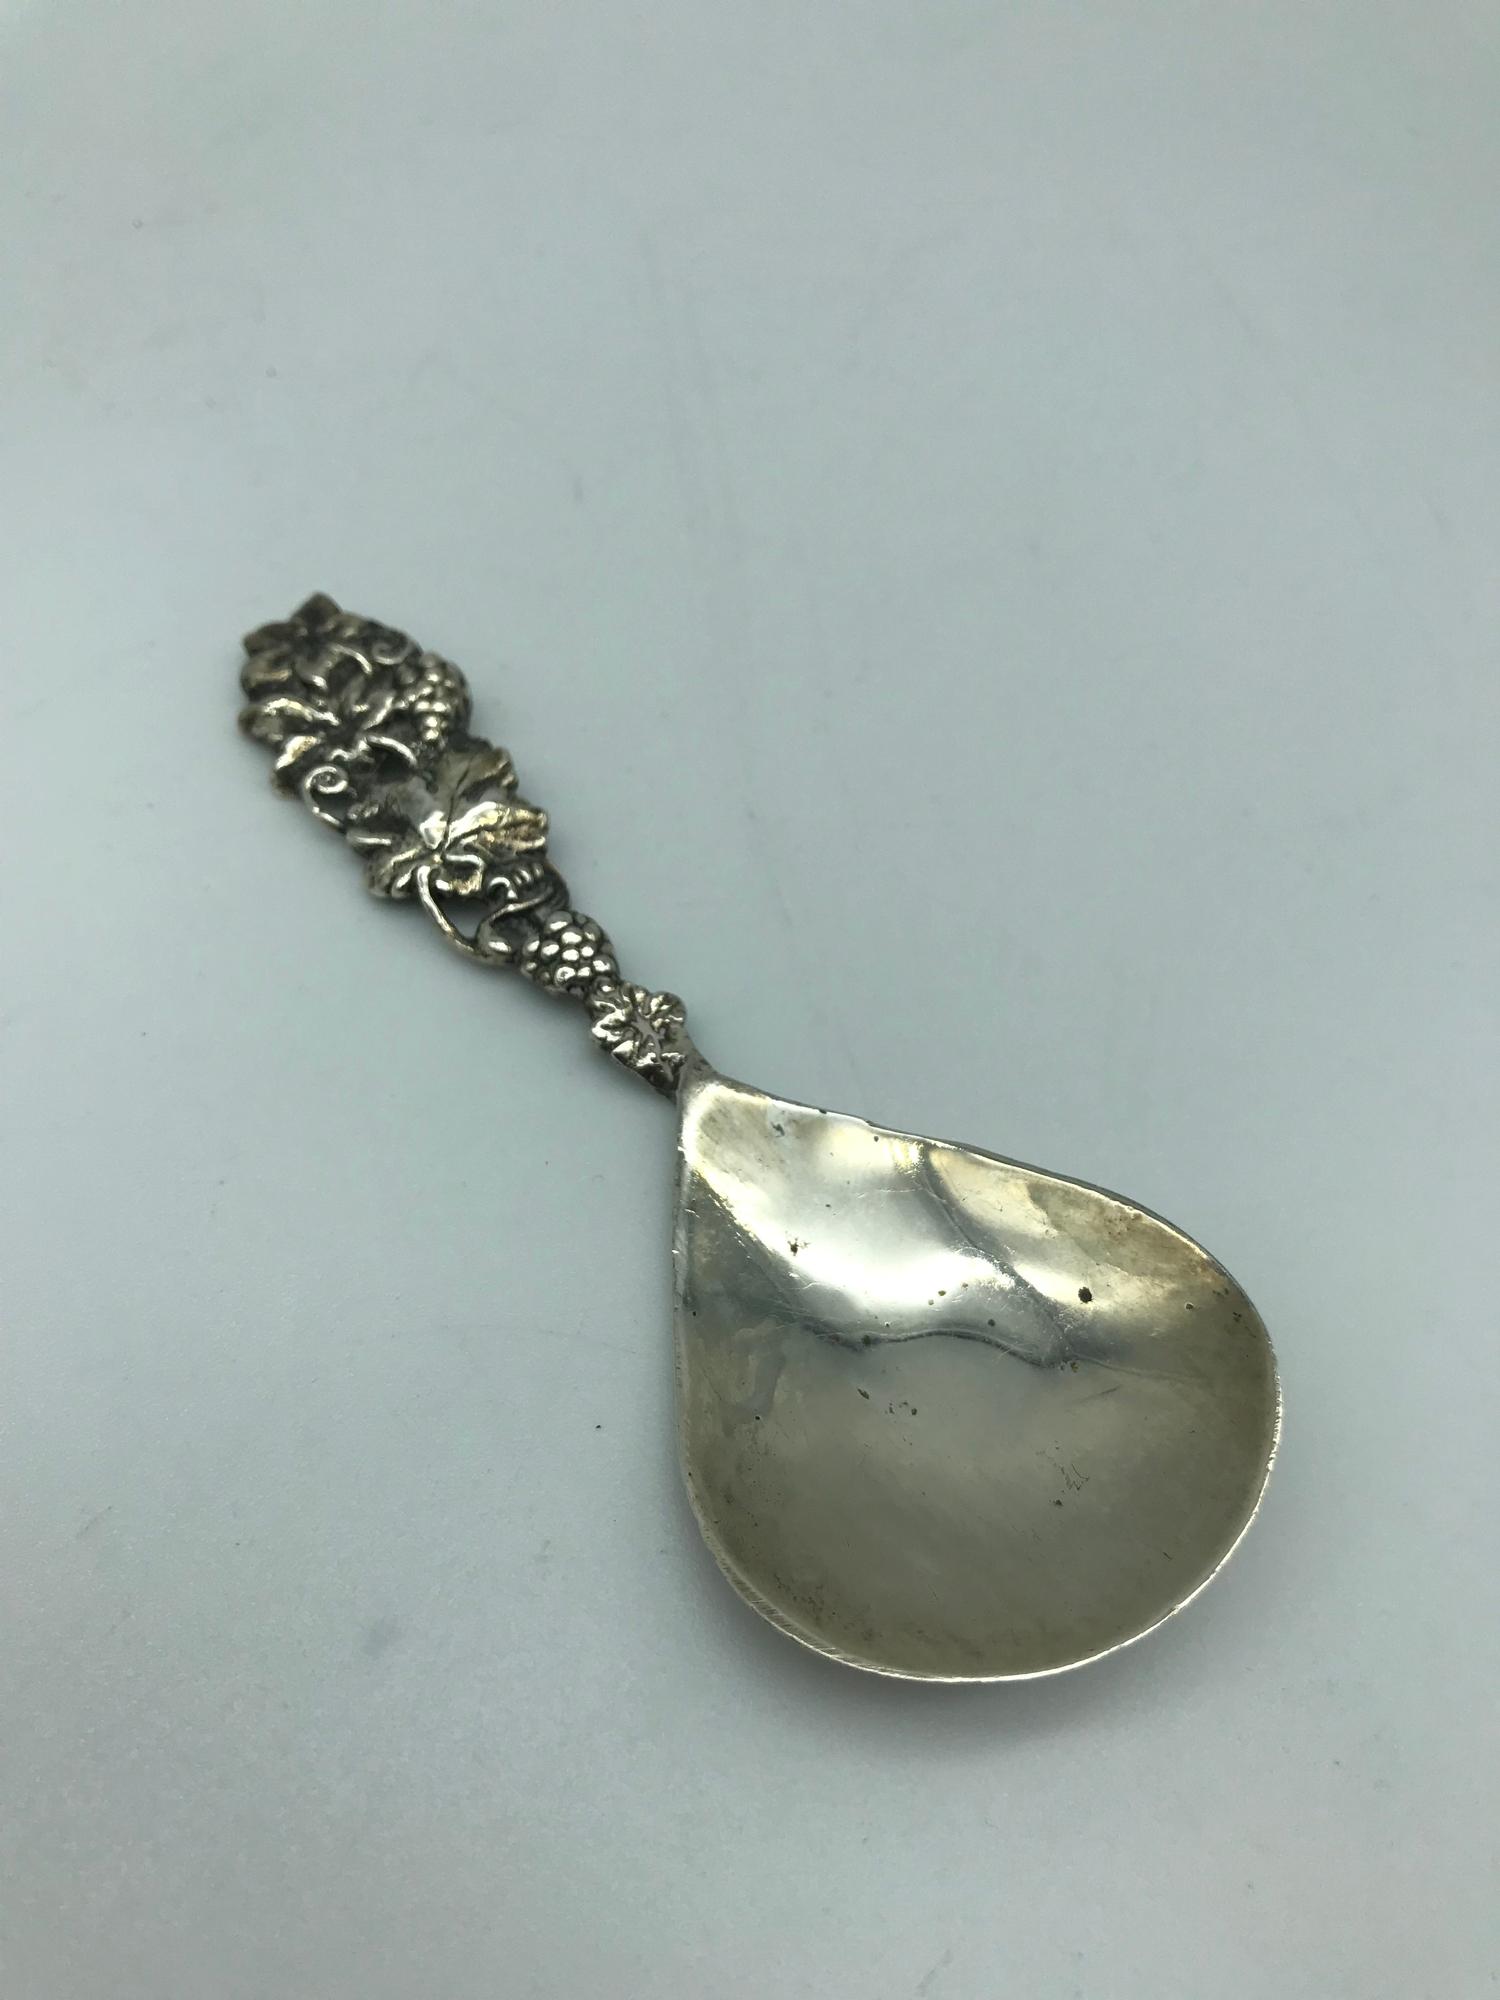 A Chester silver caddy spoon, Makers Shipton & co Ltd, Dated 1922. Designed with a grape/ vine